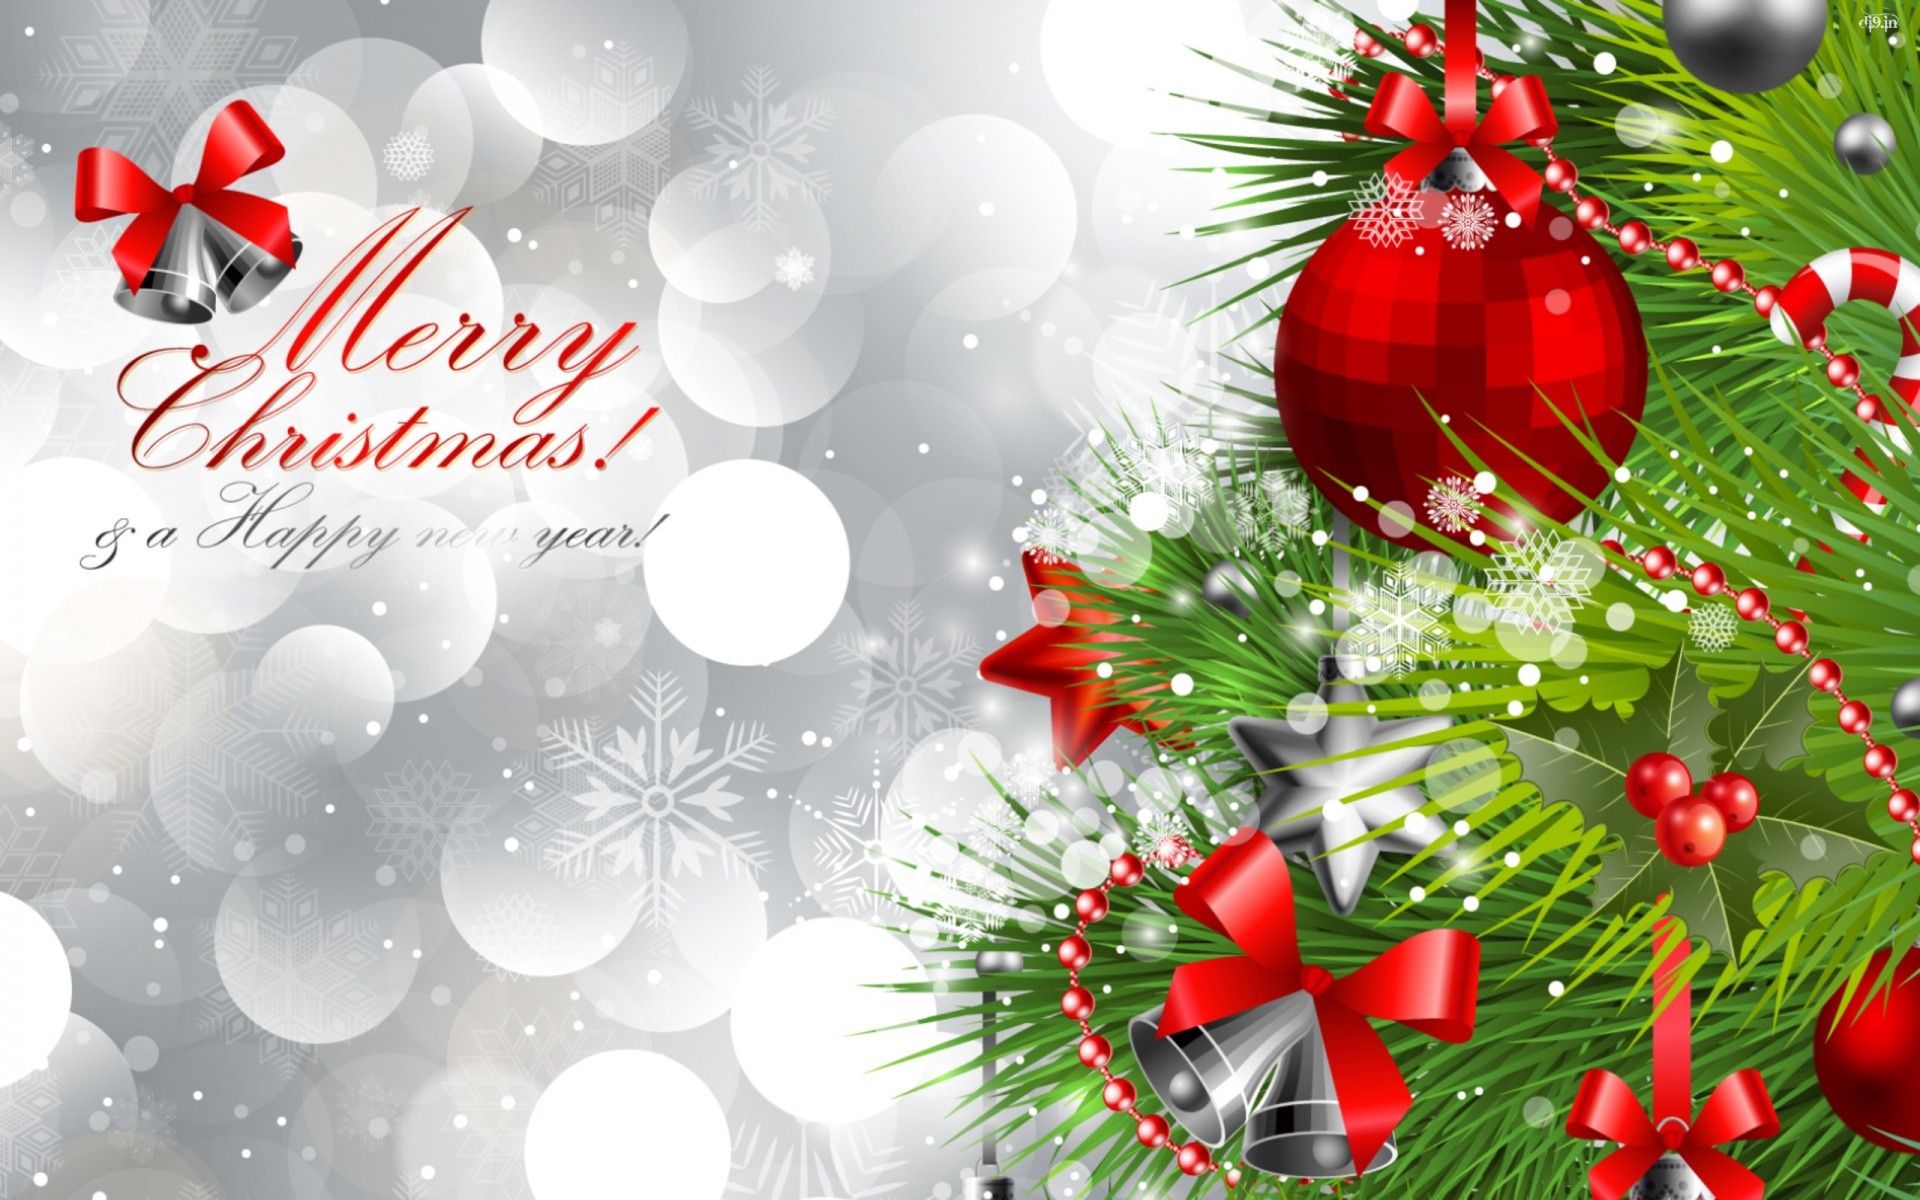 1920x1200 Merry Christmas And Happy New Year Wallpaper Hd Cool 7 HD Wallpapers